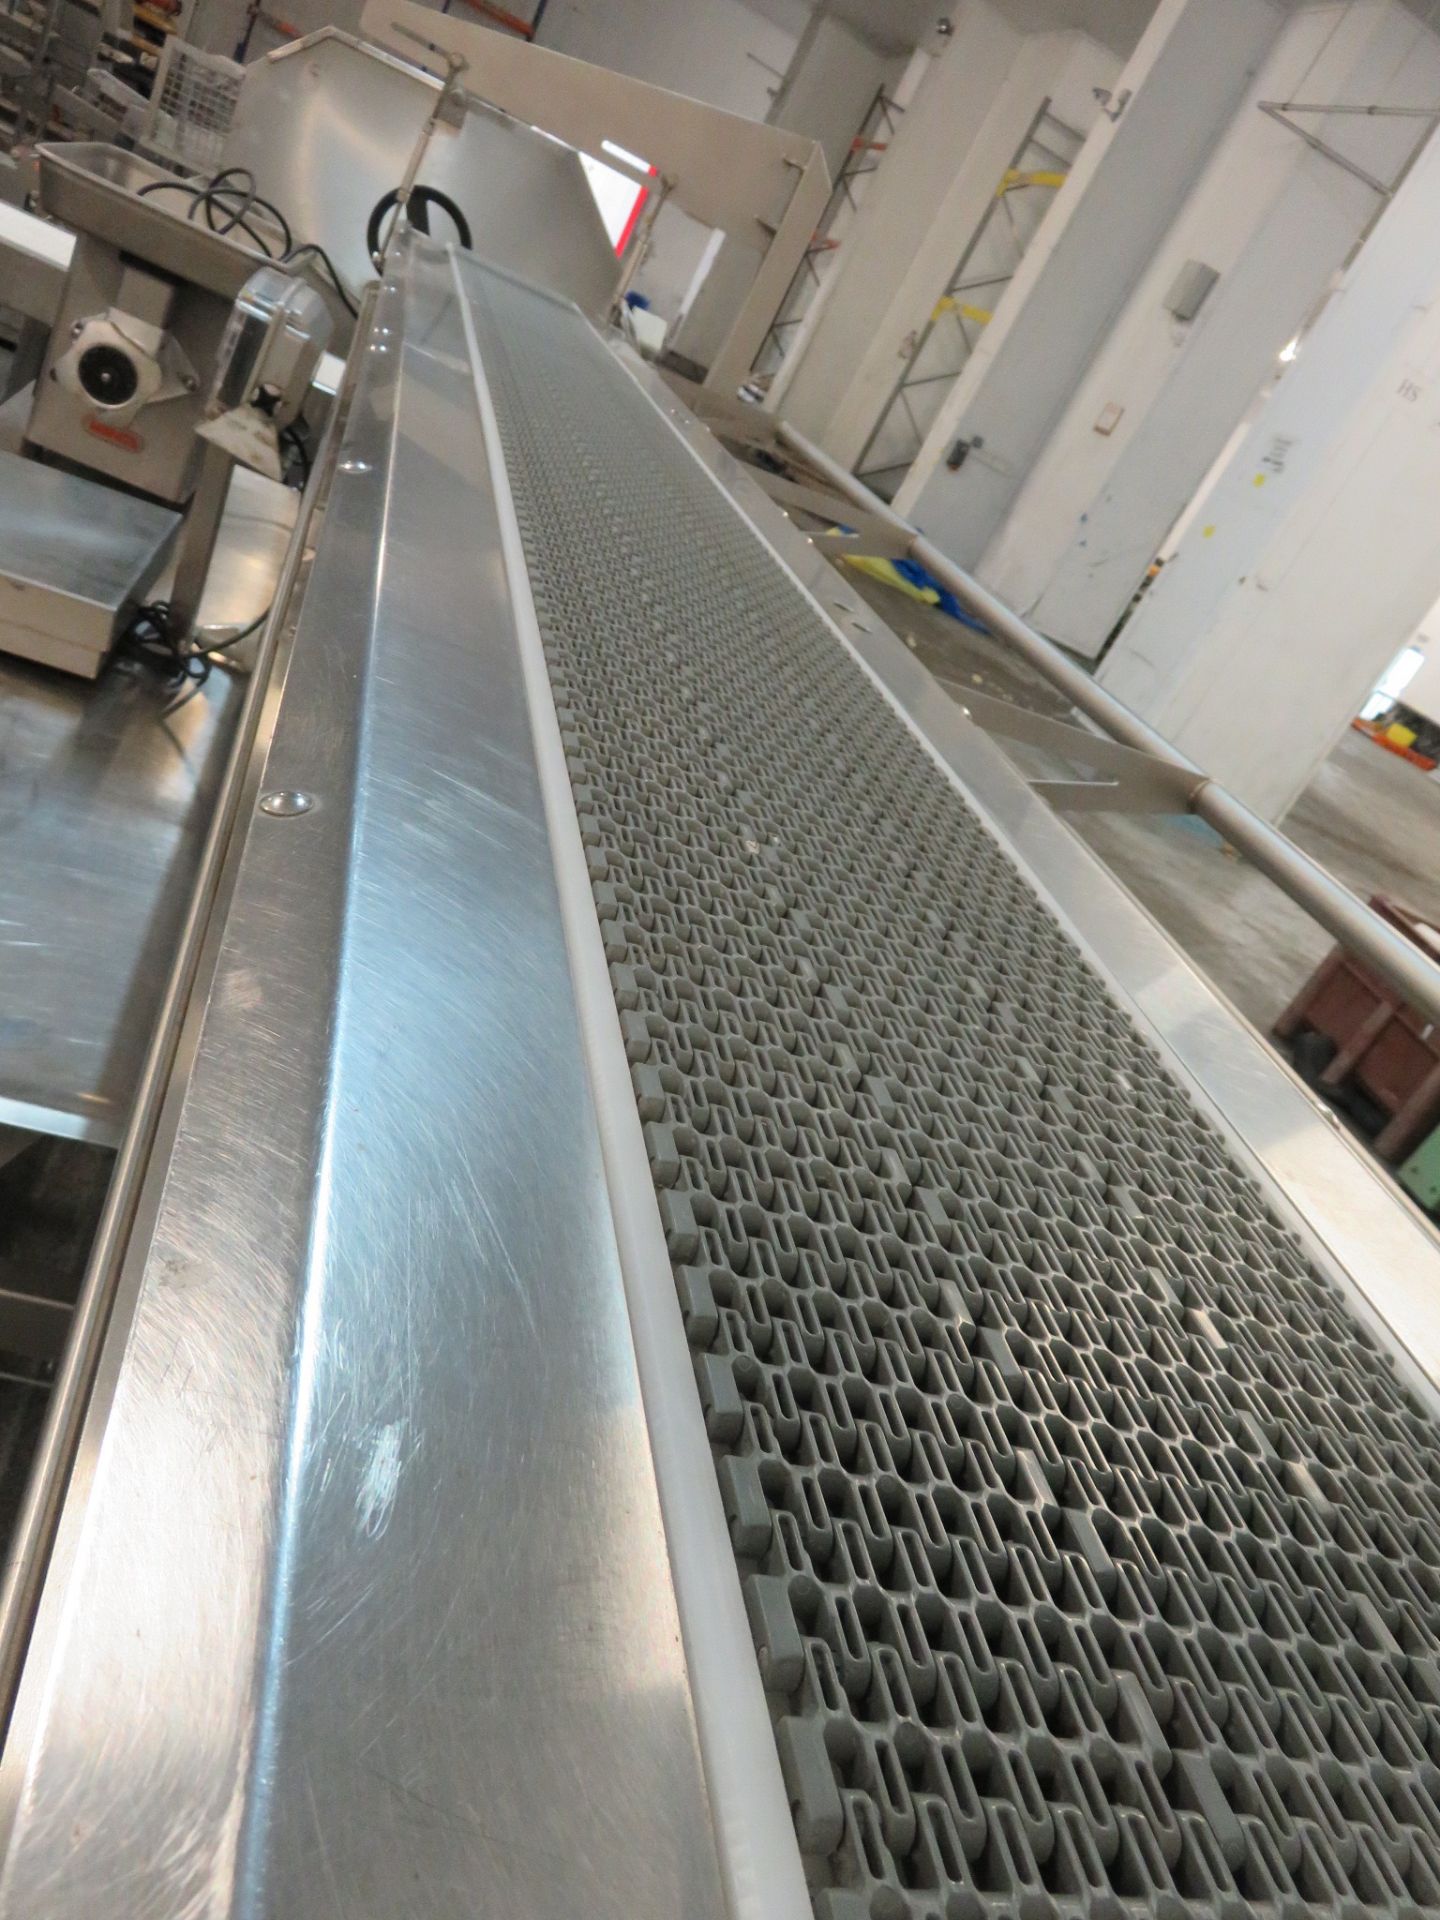 S/s Tier Conveyor. top 230mm wide, bottom 380mm wide x 3 mtr long. Magic eye Censor. As New. LO £40 - Image 4 of 6